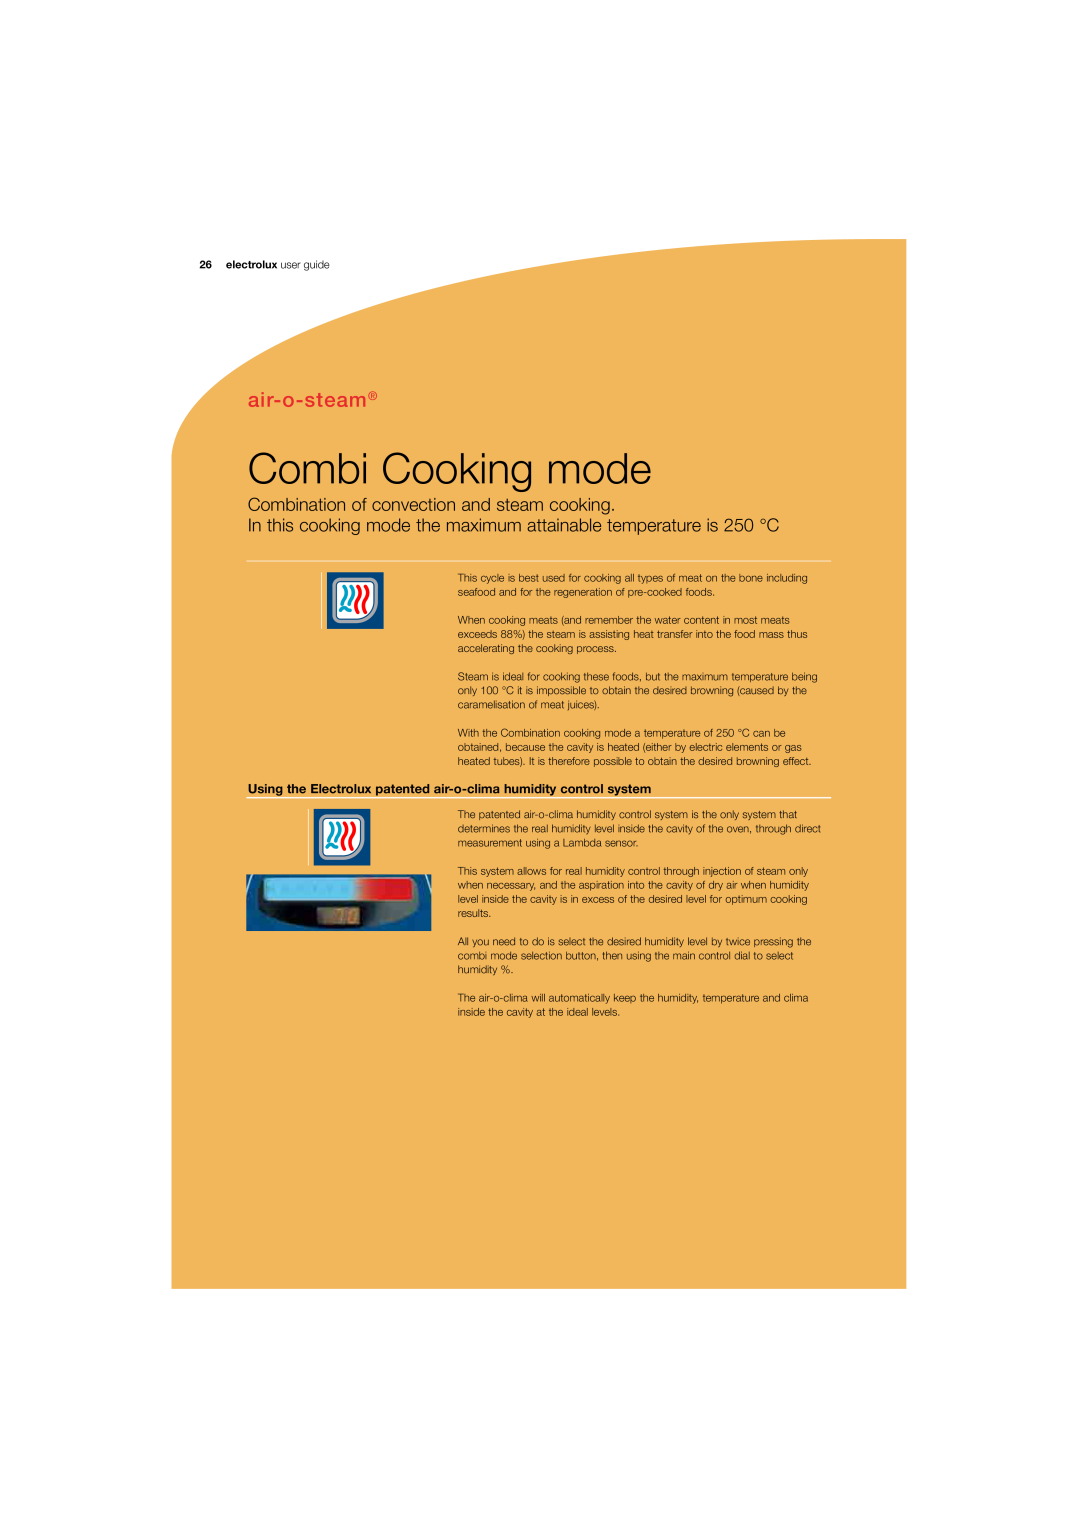 Electrolux 180 manual Combi Cooking mode, air-o-steam, Combination of convection and steam cooking, electrolux user guide 